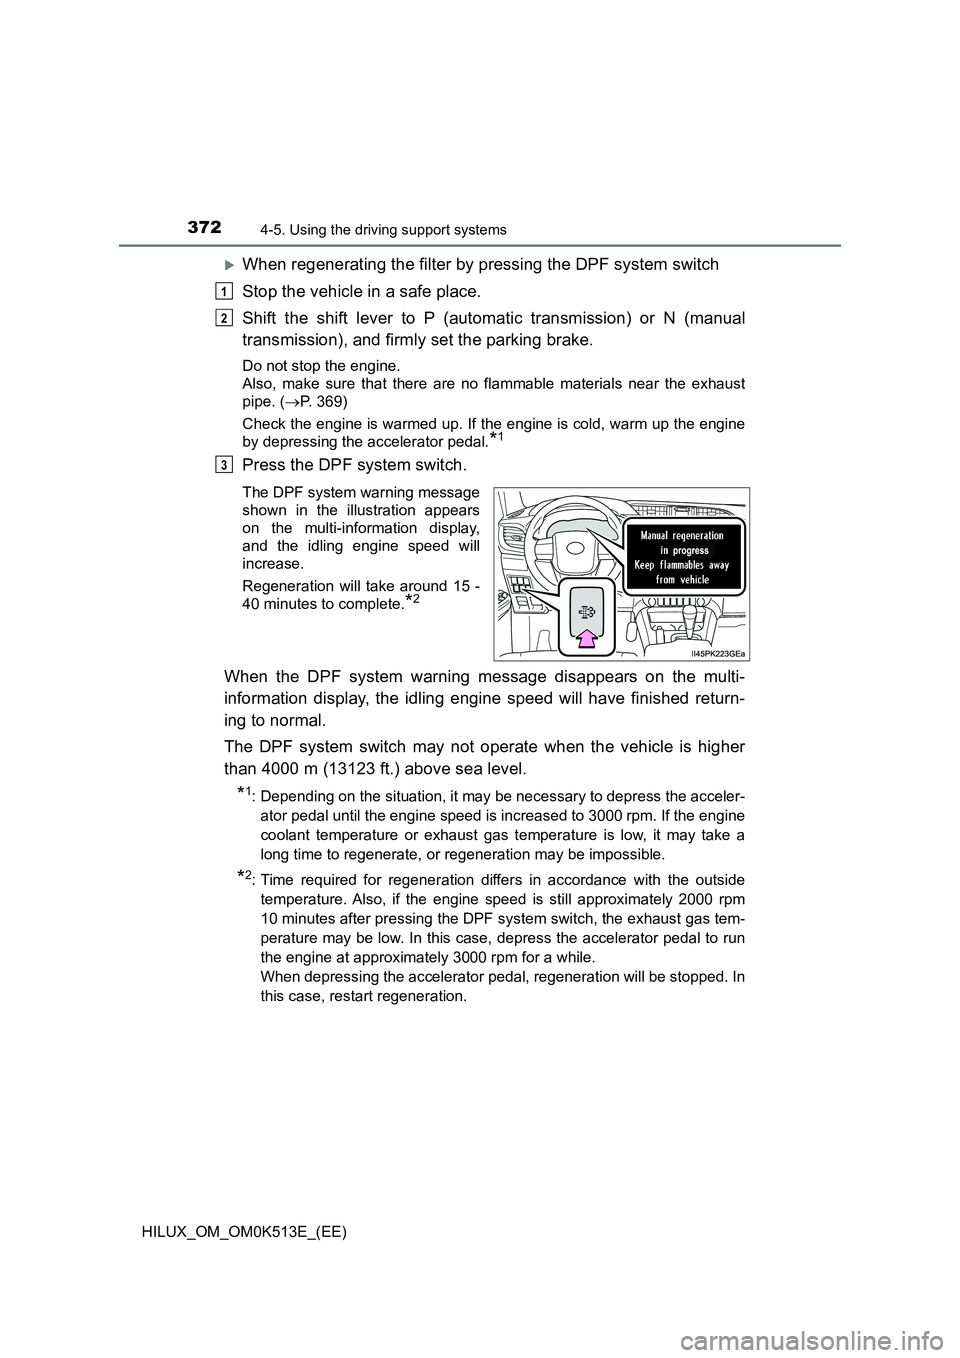 TOYOTA HILUX 2021  Owners Manual (in English) 3724-5. Using the driving support systems
HILUX_OM_OM0K513E_(EE)
When regenerating the filter by pressing the DPF system switch 
Stop the vehicle in a safe place. 
Shift the shift lever to P (autom